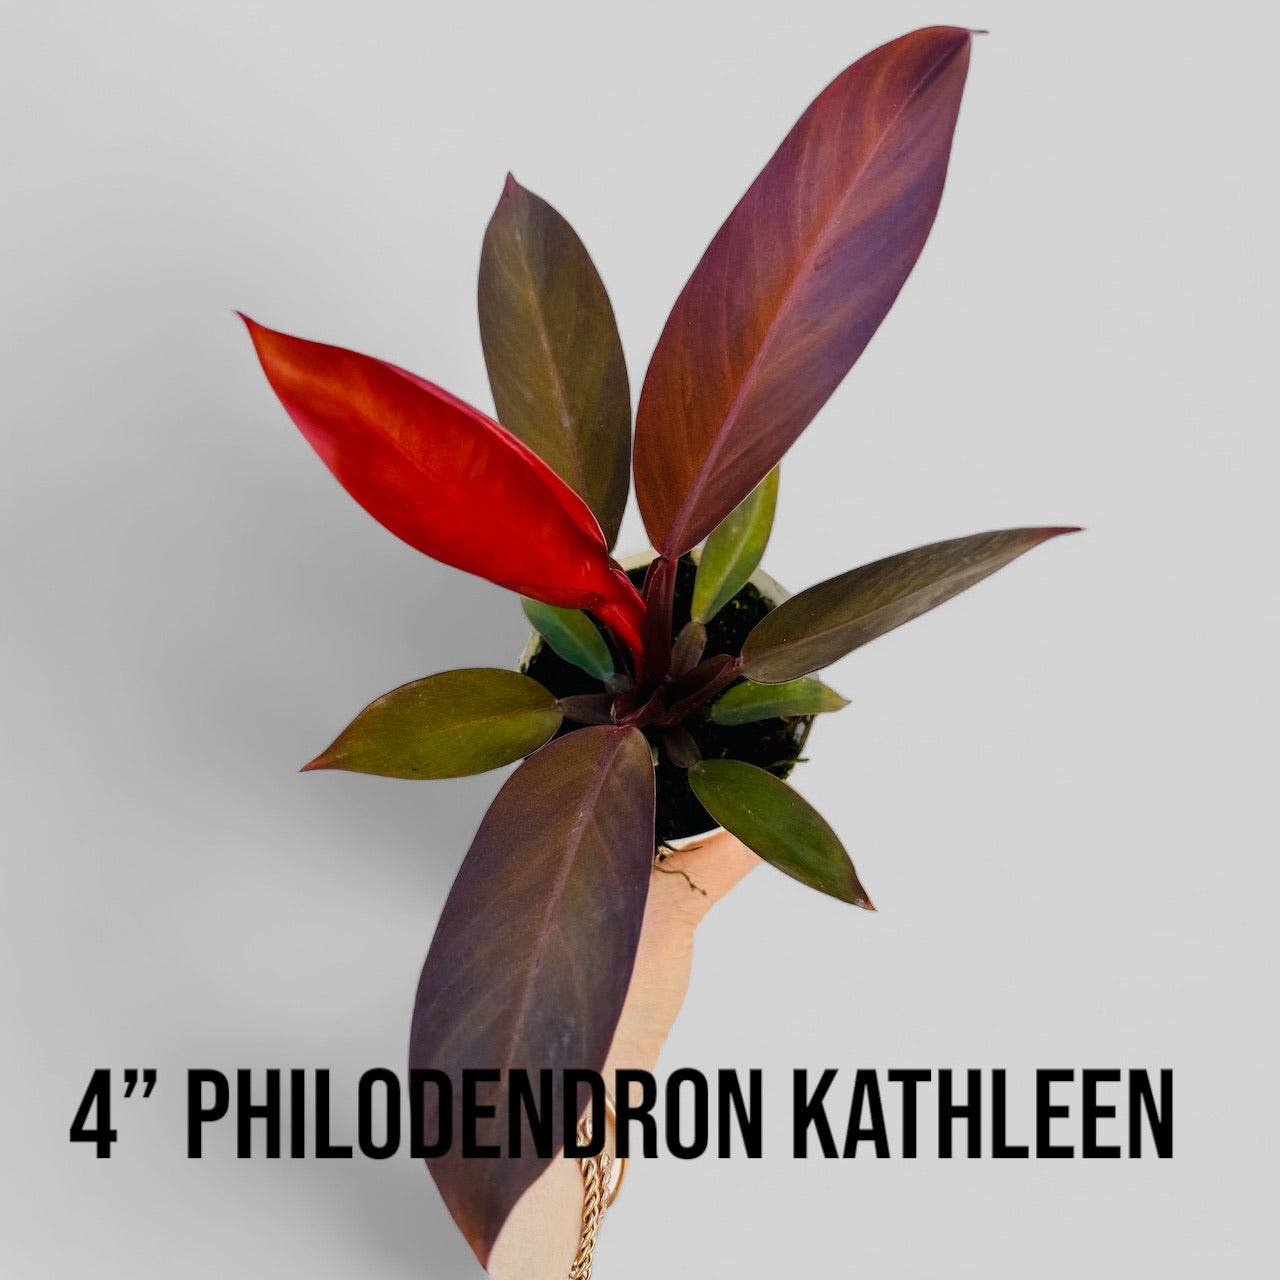 Philodendron Kathleen Indoor Tropical Houseplant for sale near me - Plant Vault